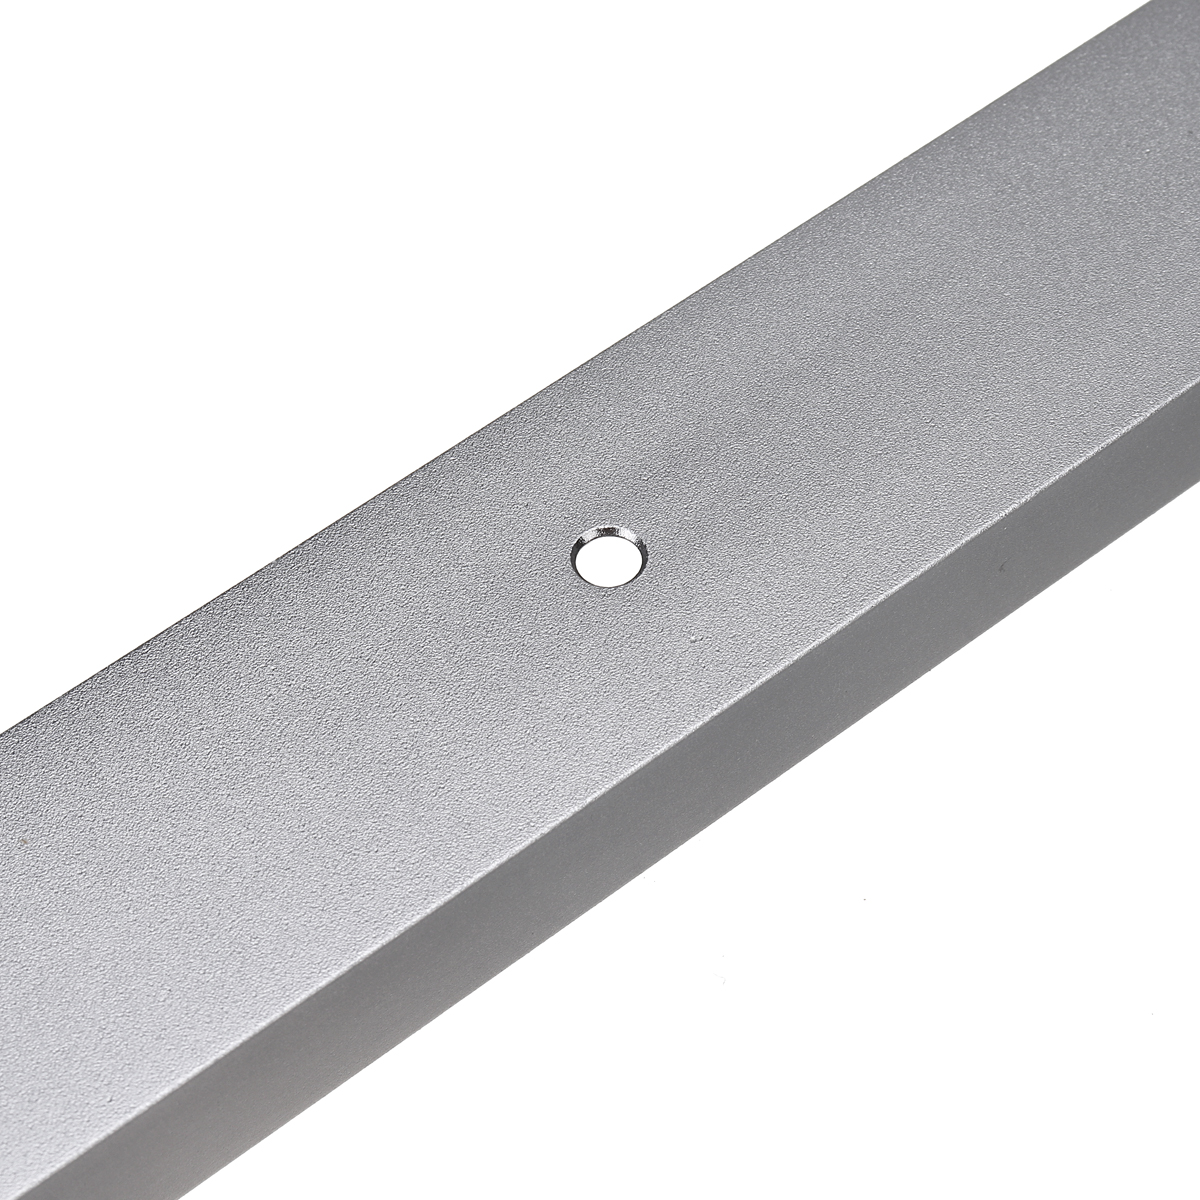 300mm-to-1220mm-Grey-T-Track-with-Predrilled-Mounting-Holes-30mm-x-128mm-Miter-Slot-for-Saw-Router-T-1810952-11